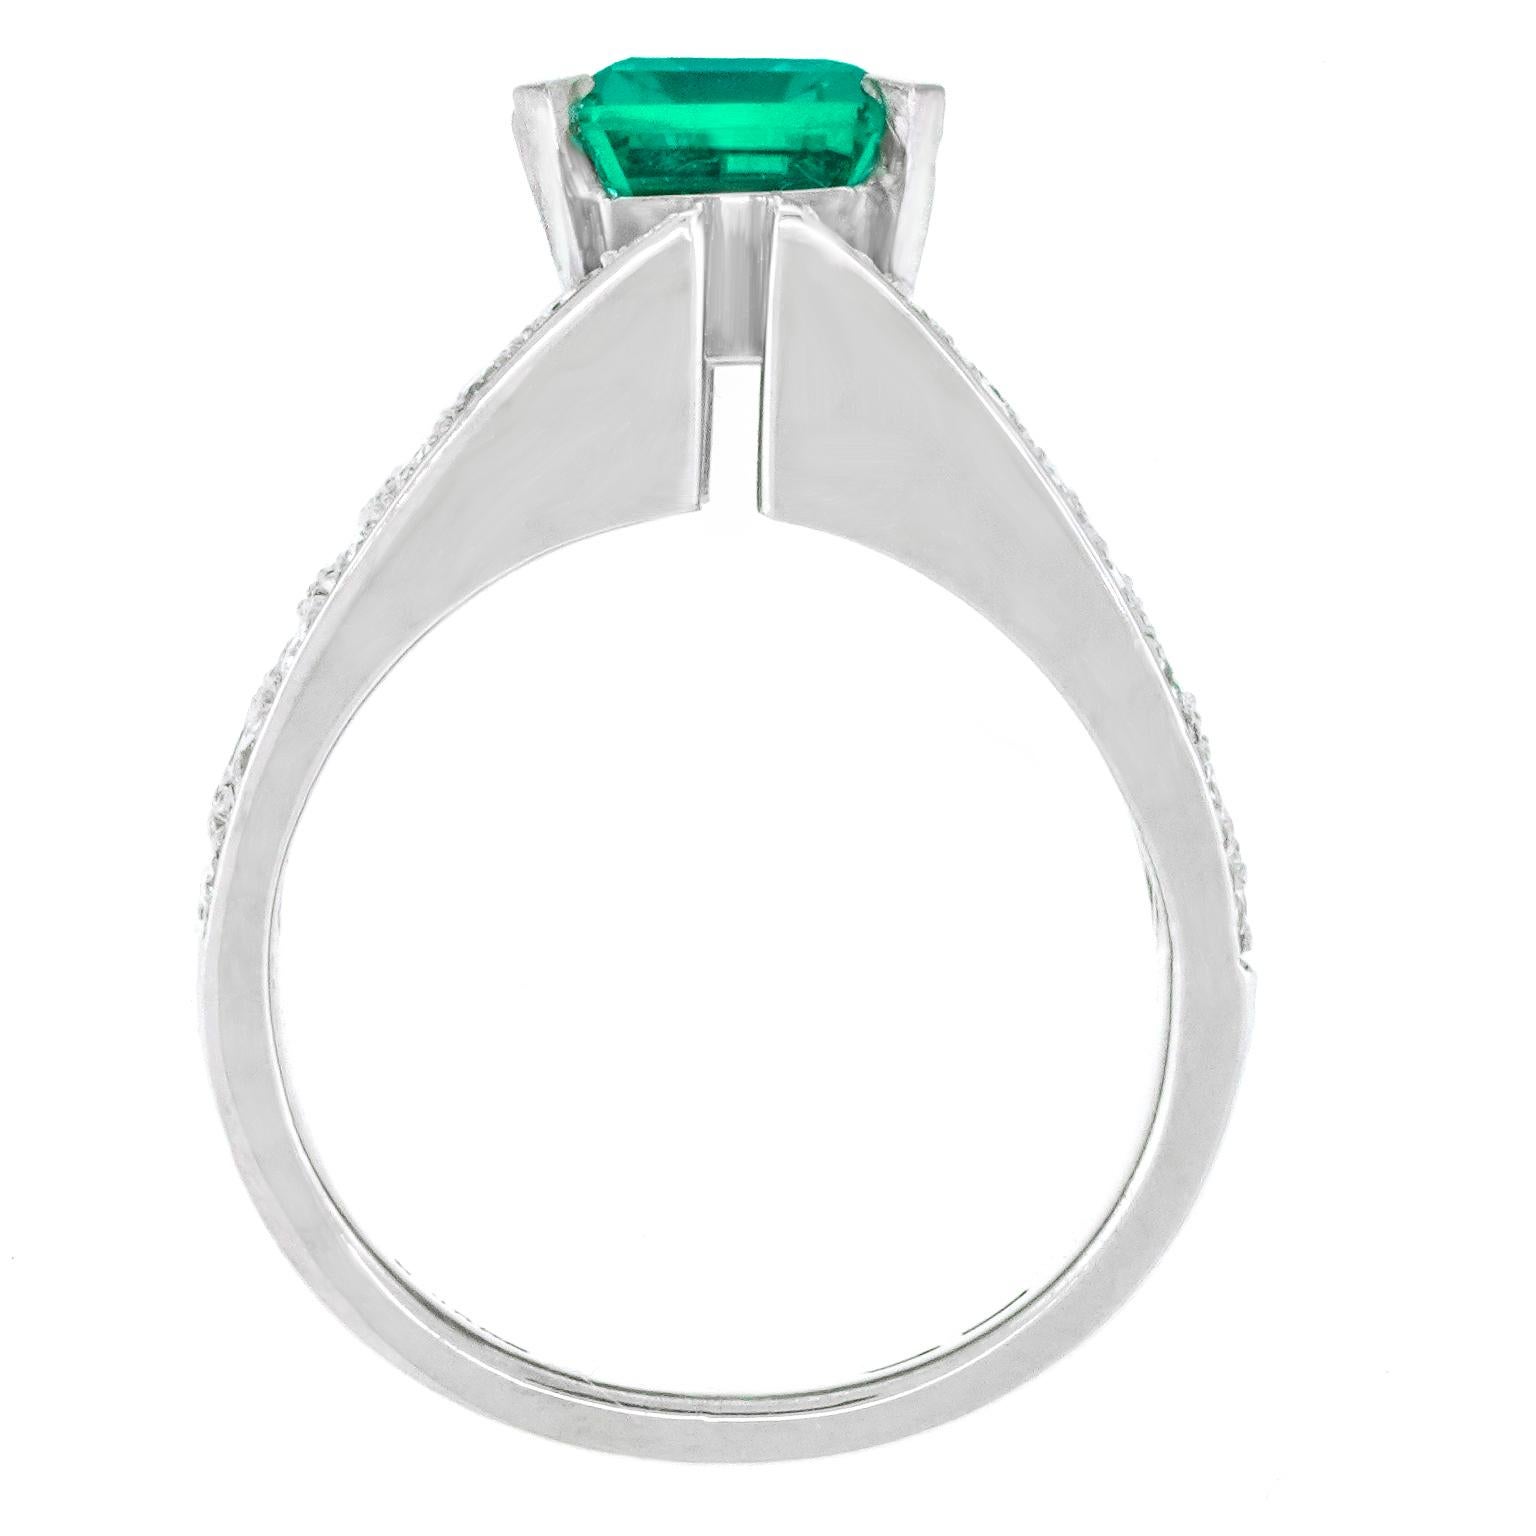 Paul Binder Hyper-Modern Sixties Cocktail Ring For Sale 3